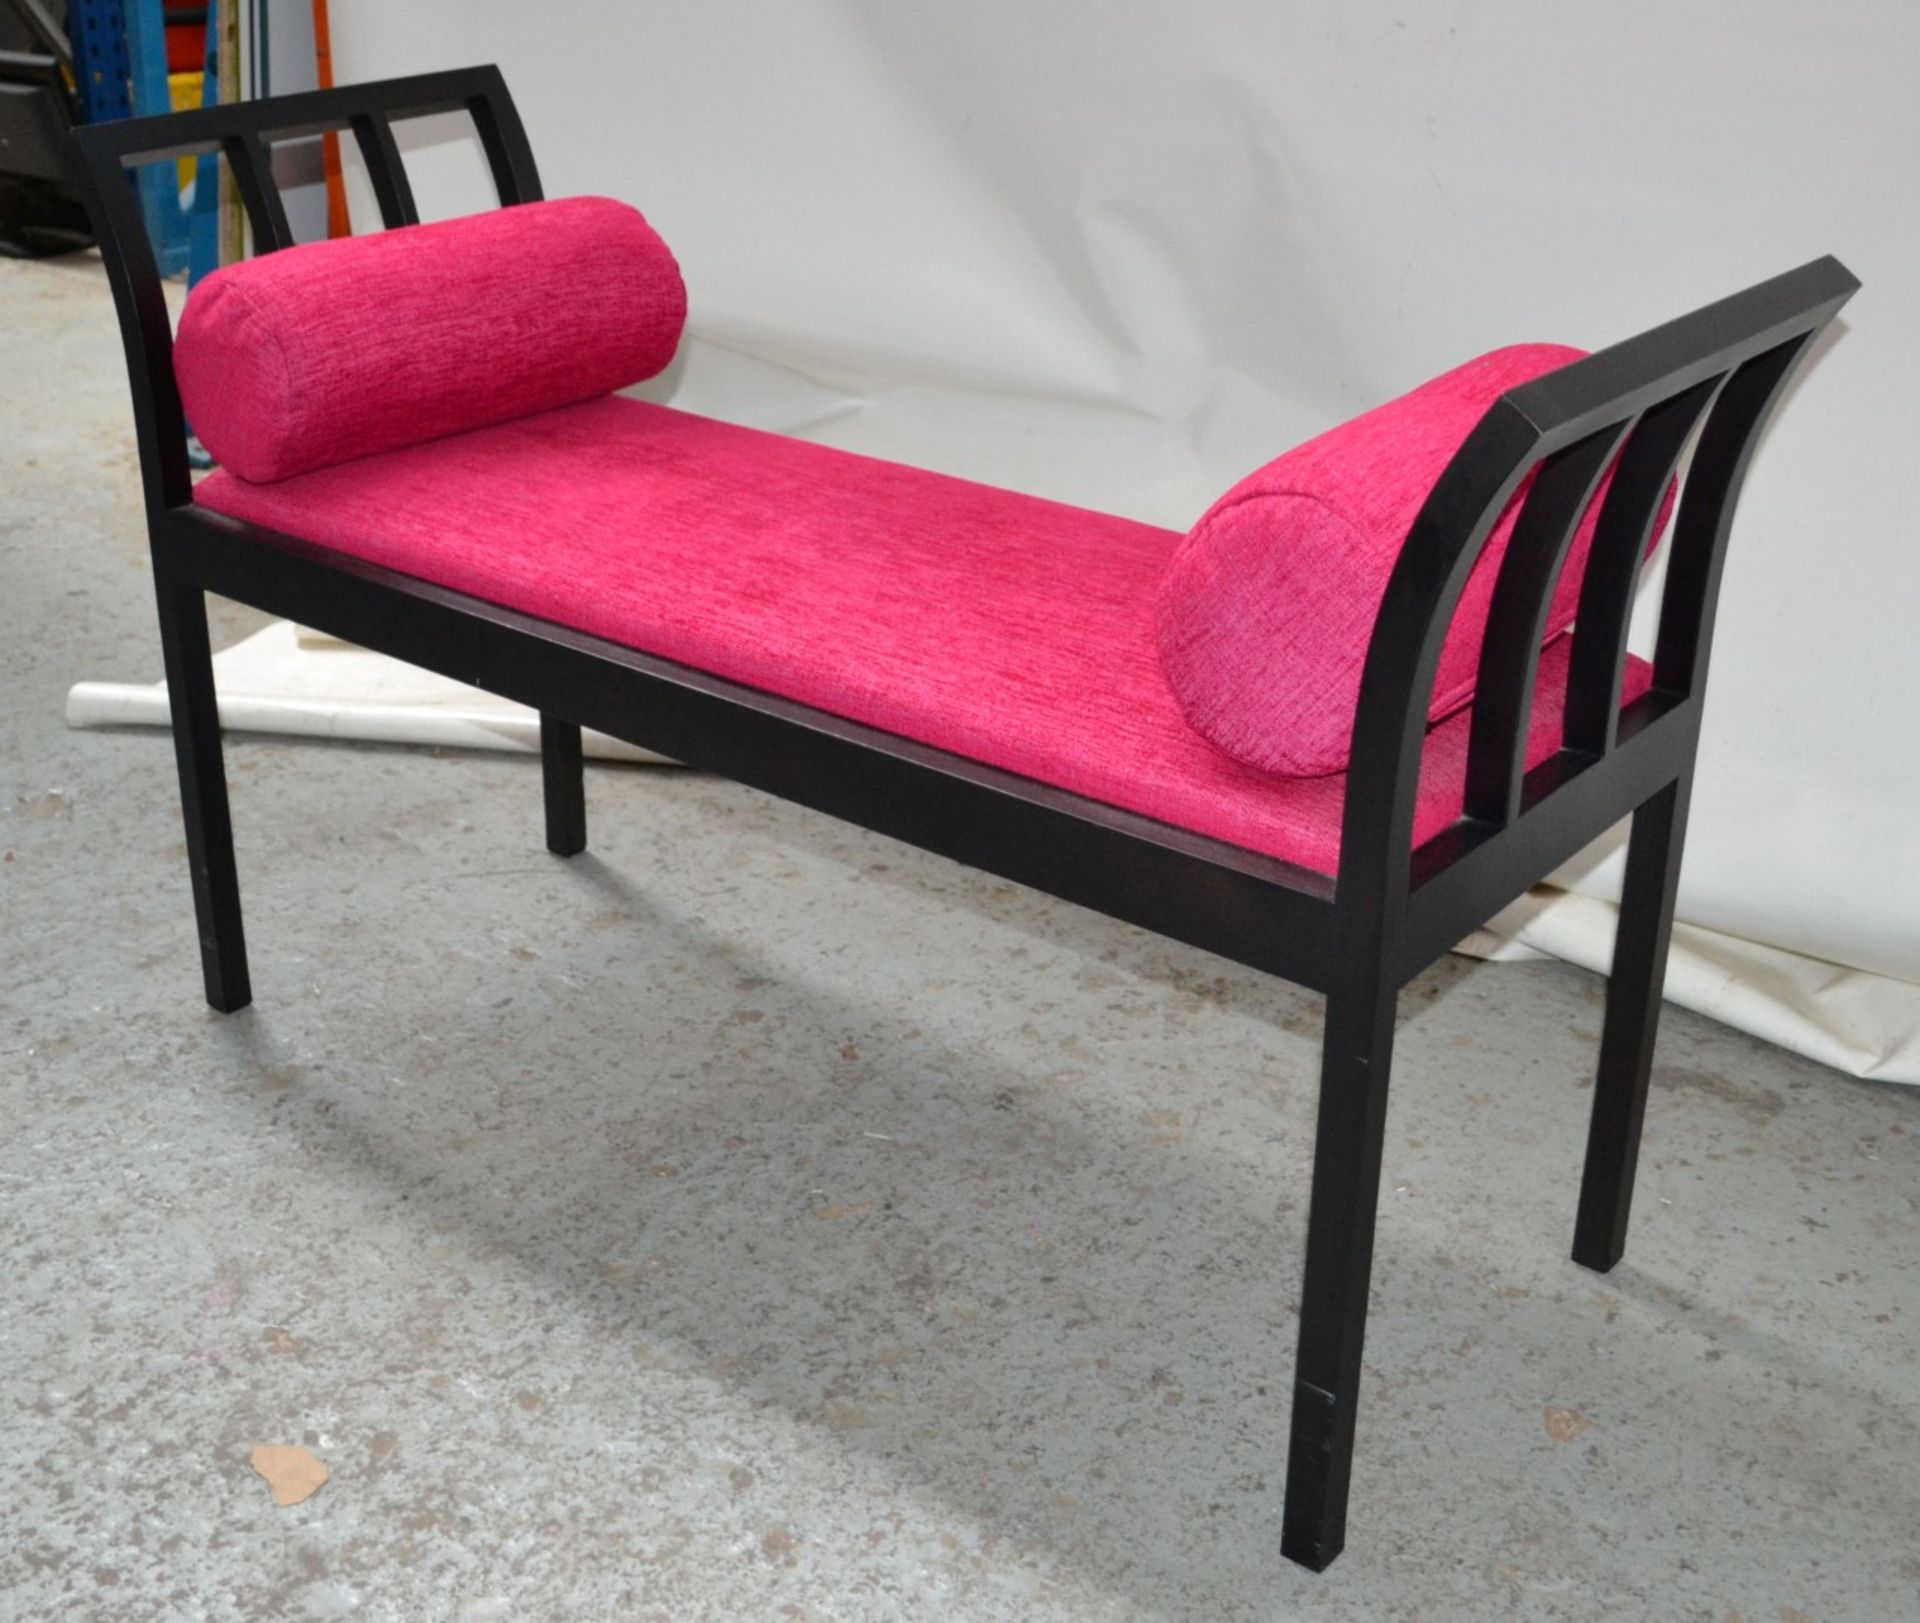 1 x Magenta Upholstered Bedroom Bench with 2 Cushions - CL314 - Location: Altrincham WA14 - *NO VAT - Image 11 of 11